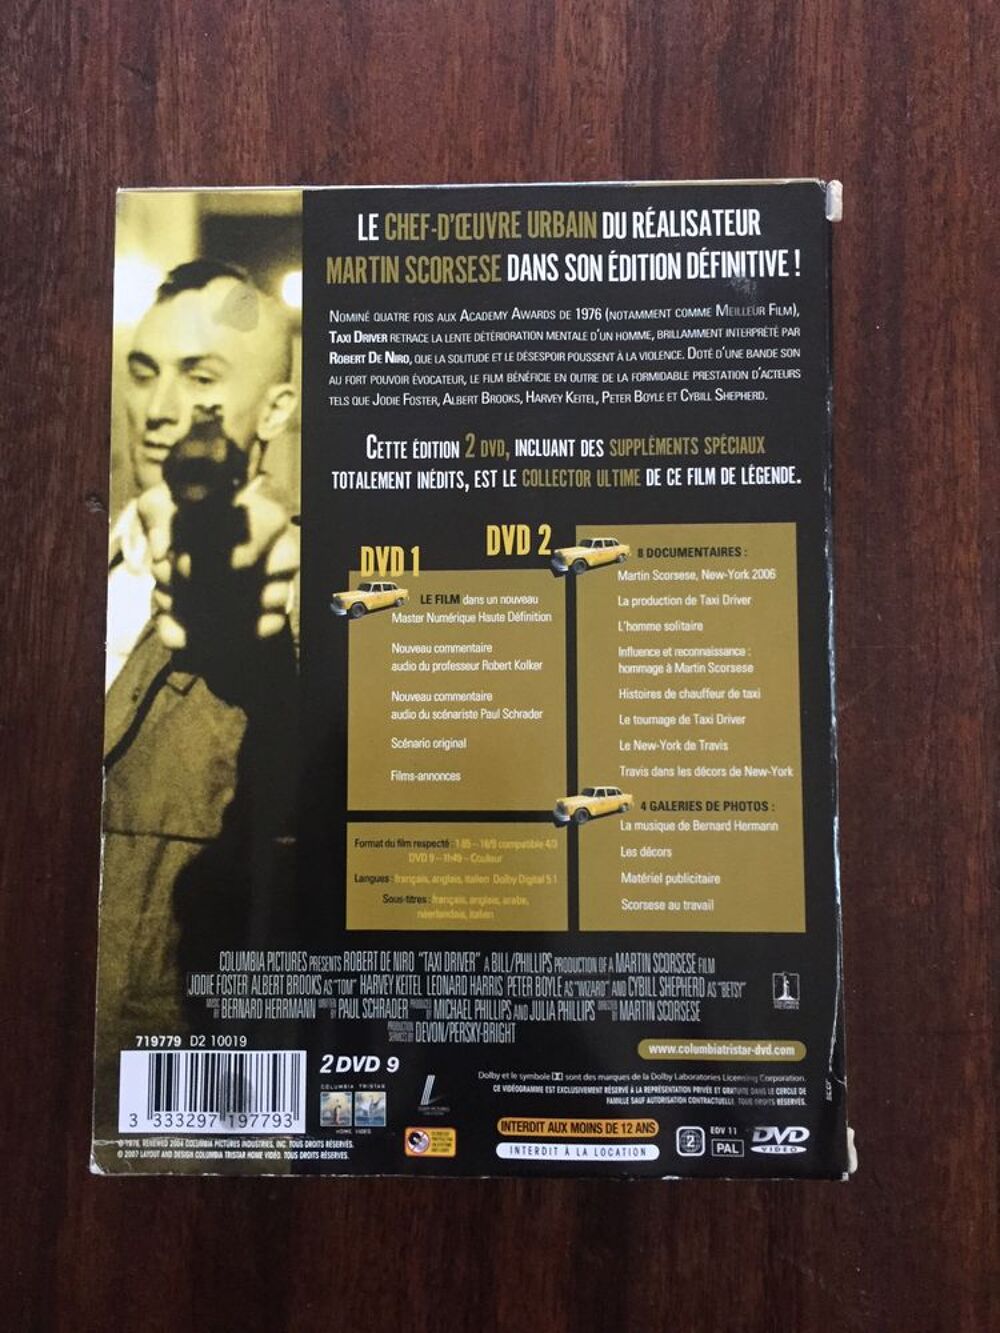 Coffret 2 DVD Edition collector &quot; Taxi driver &quot; DVD et blu-ray